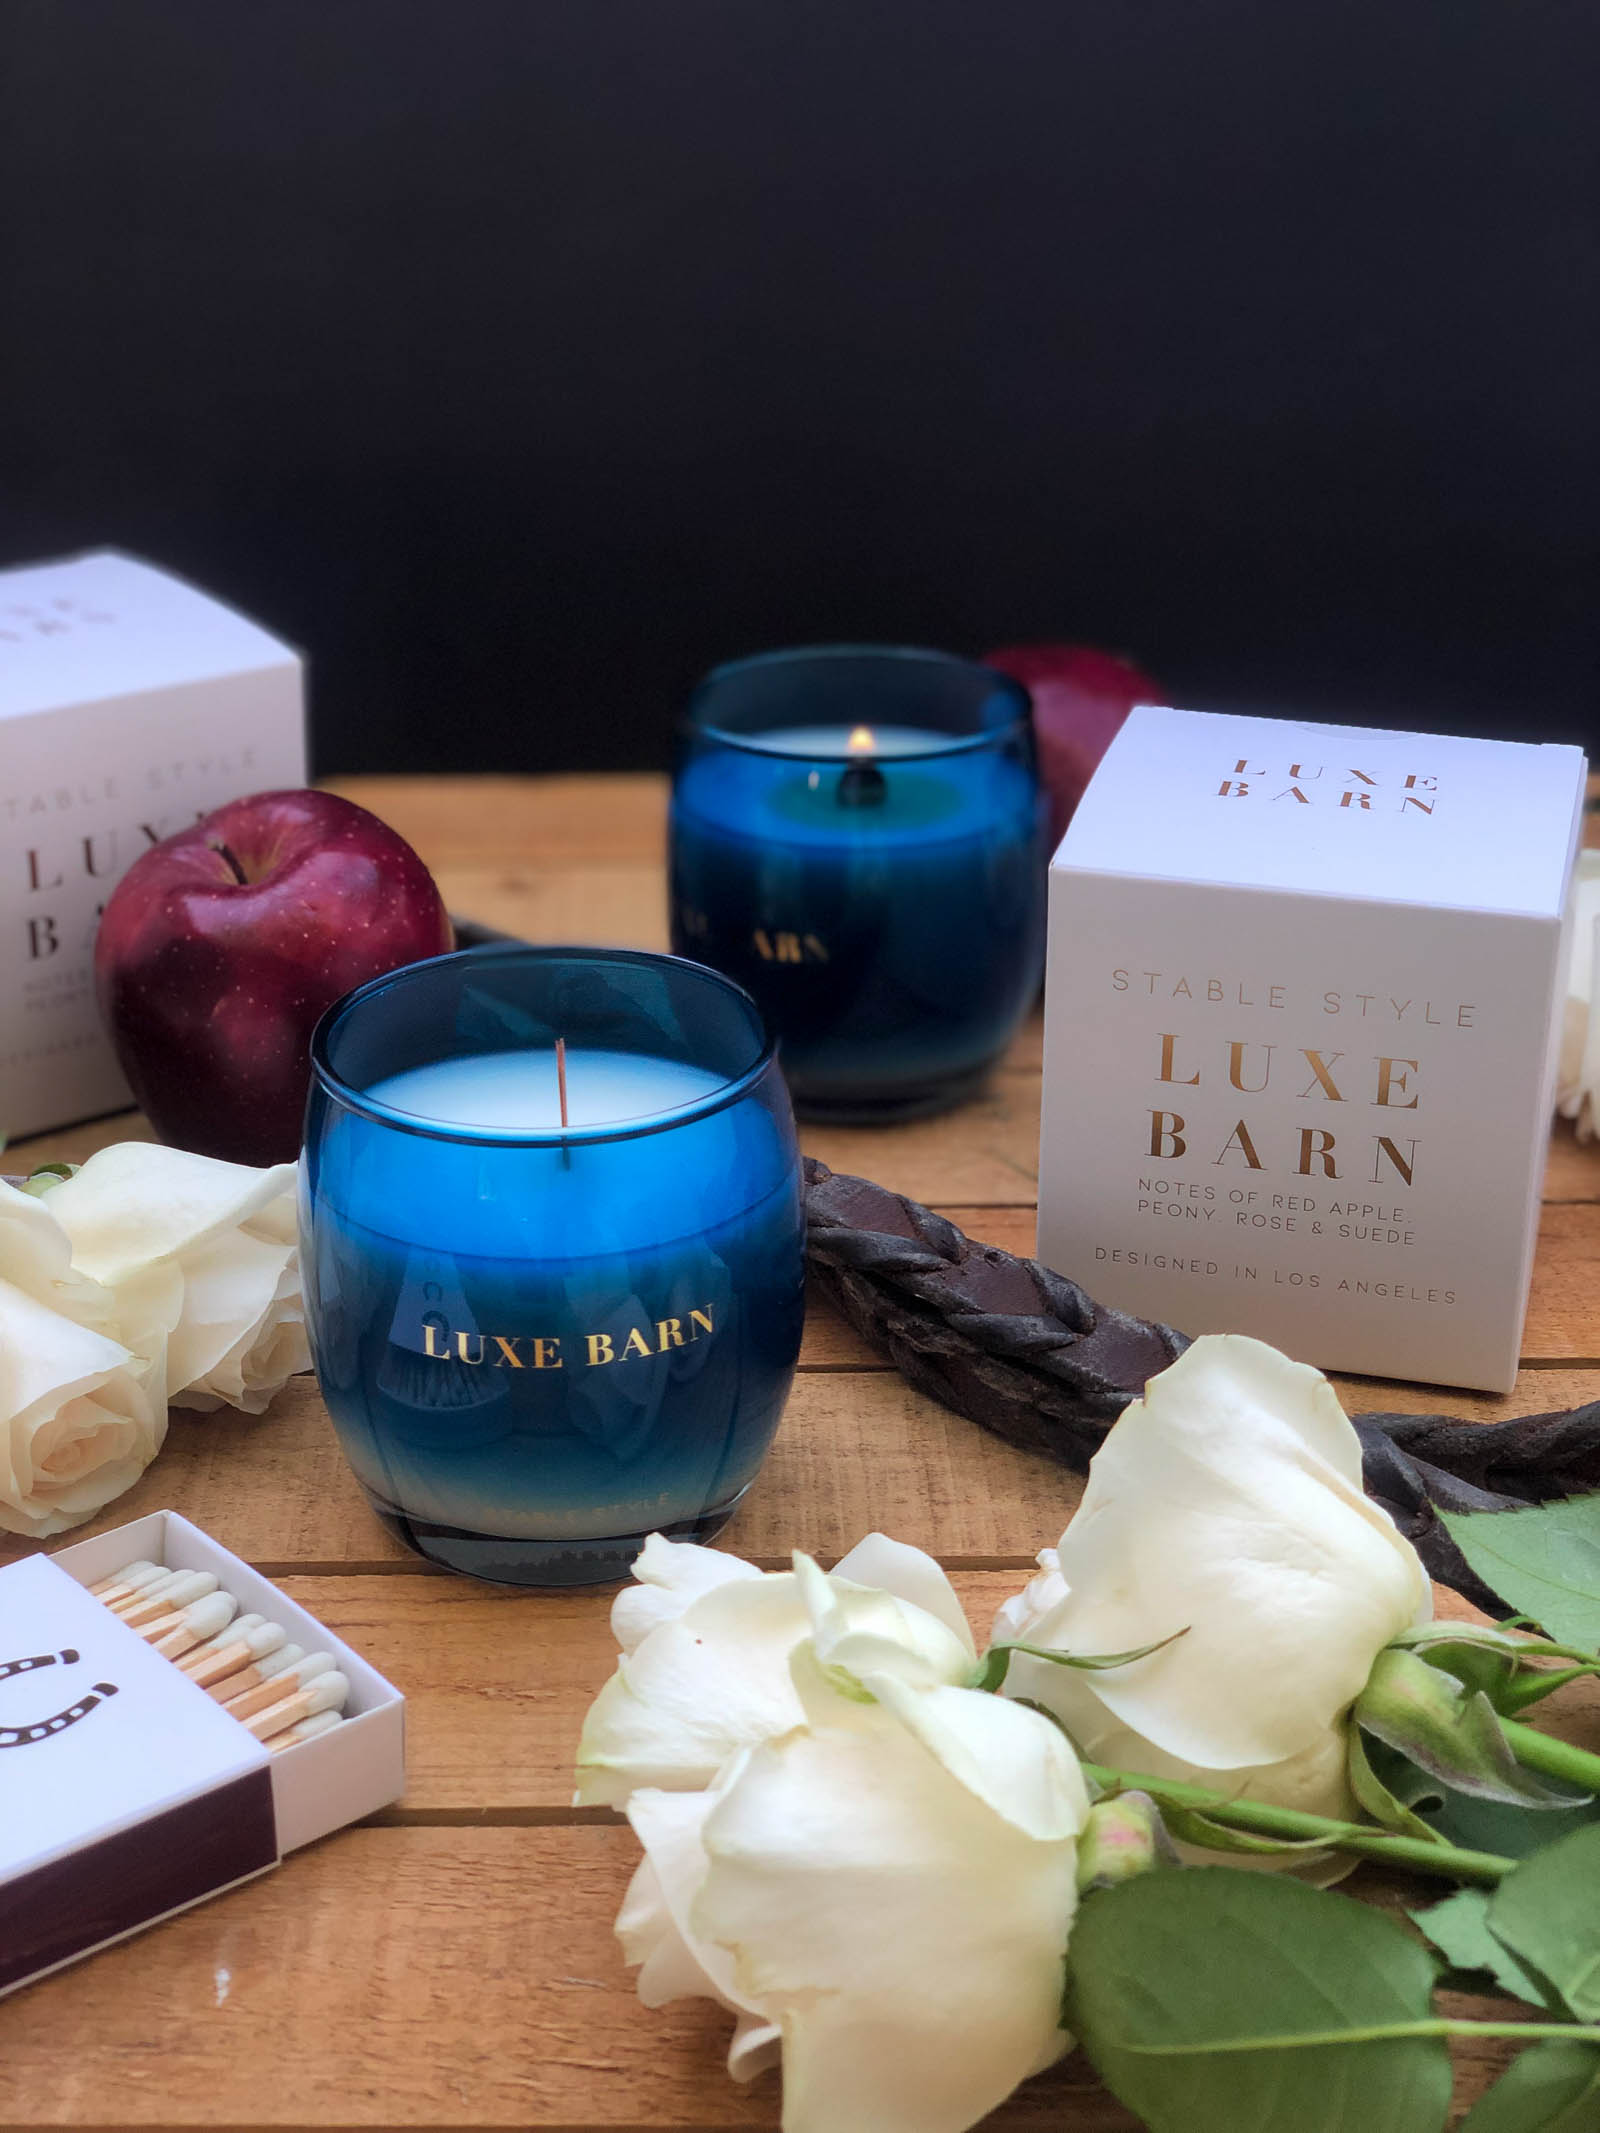 Luxe Barn soy candle by Stable Style